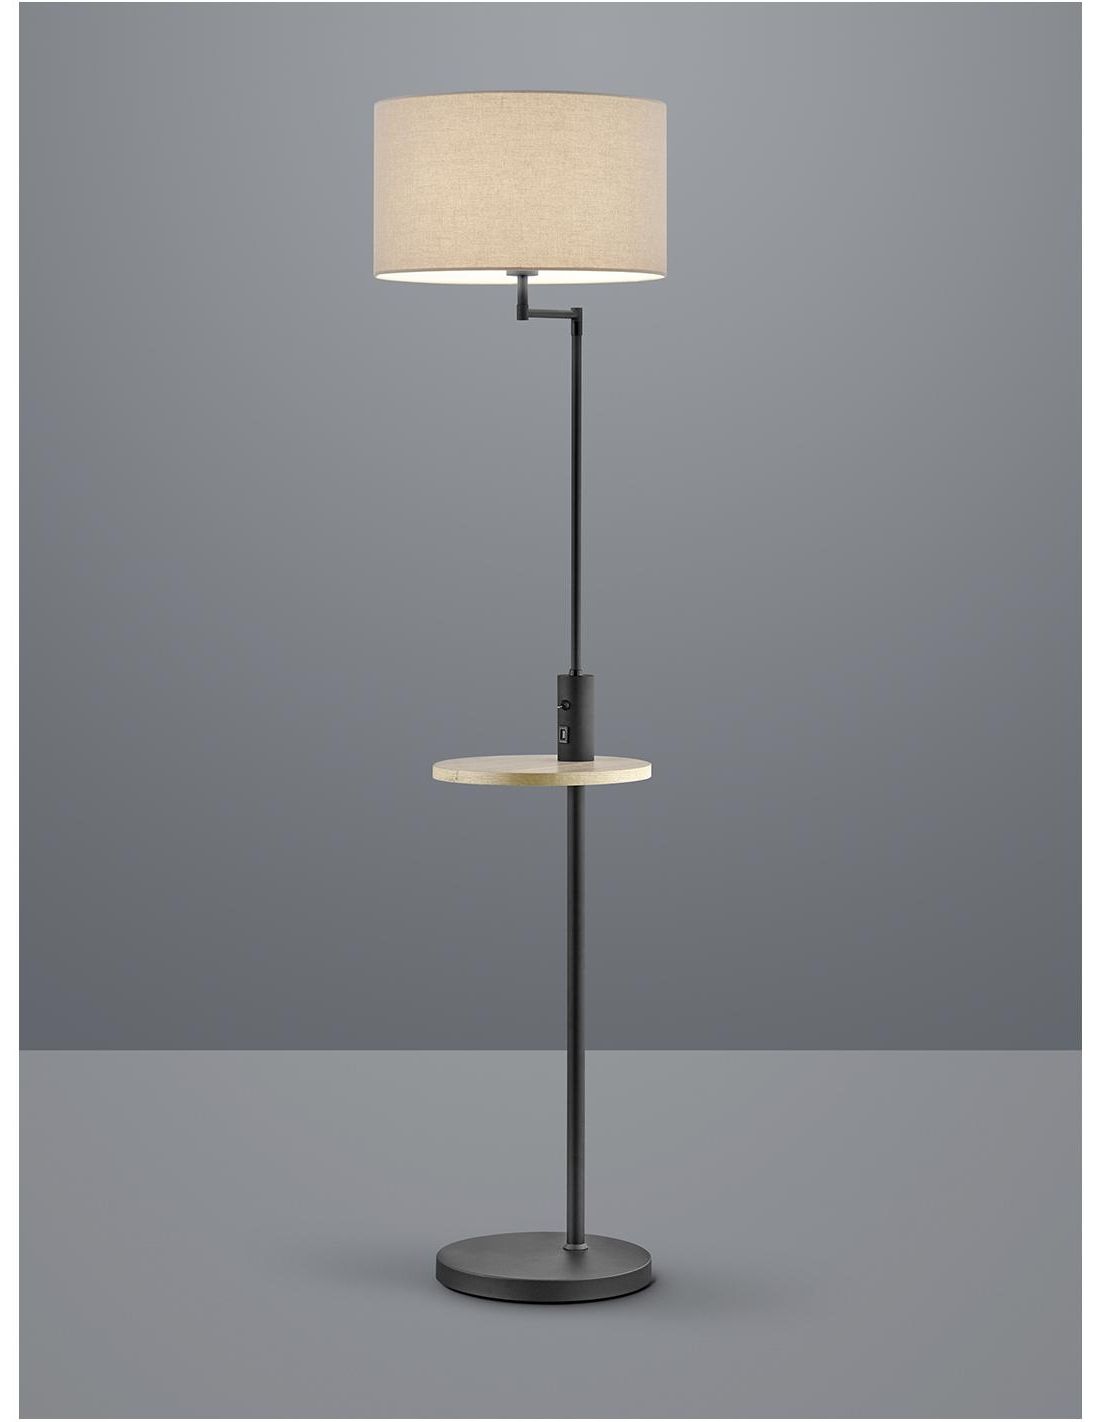 Trio 400400132 Claas Floor Lamp Black Usb Intended For Floor Lamps With Usb (View 1 of 20)